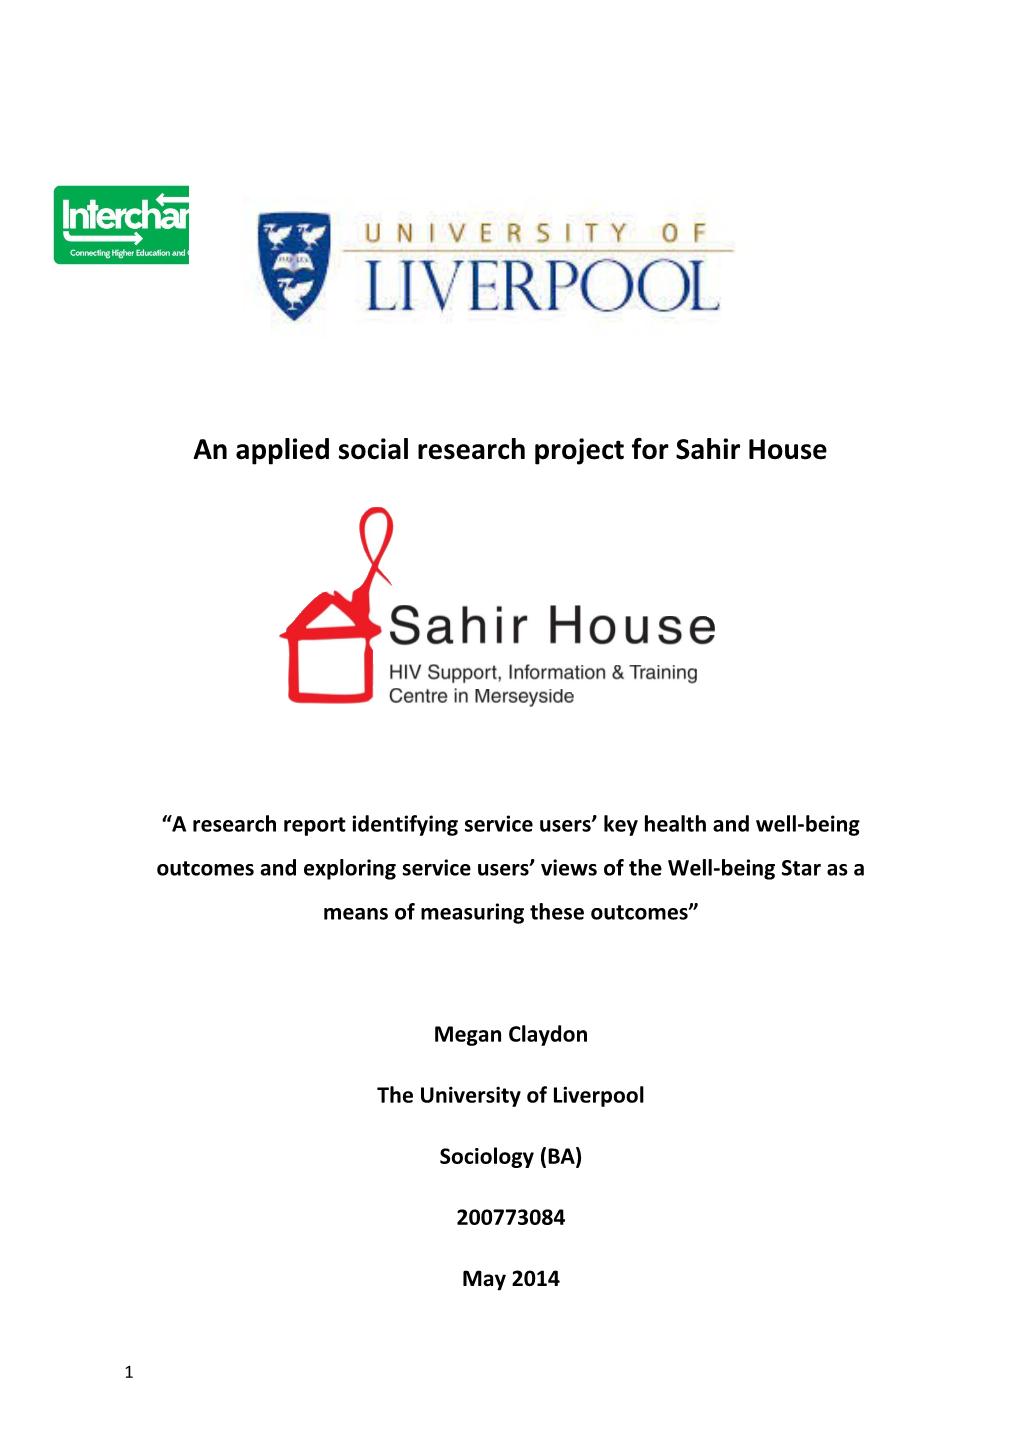 An Applied Social Research Project for Sahir House